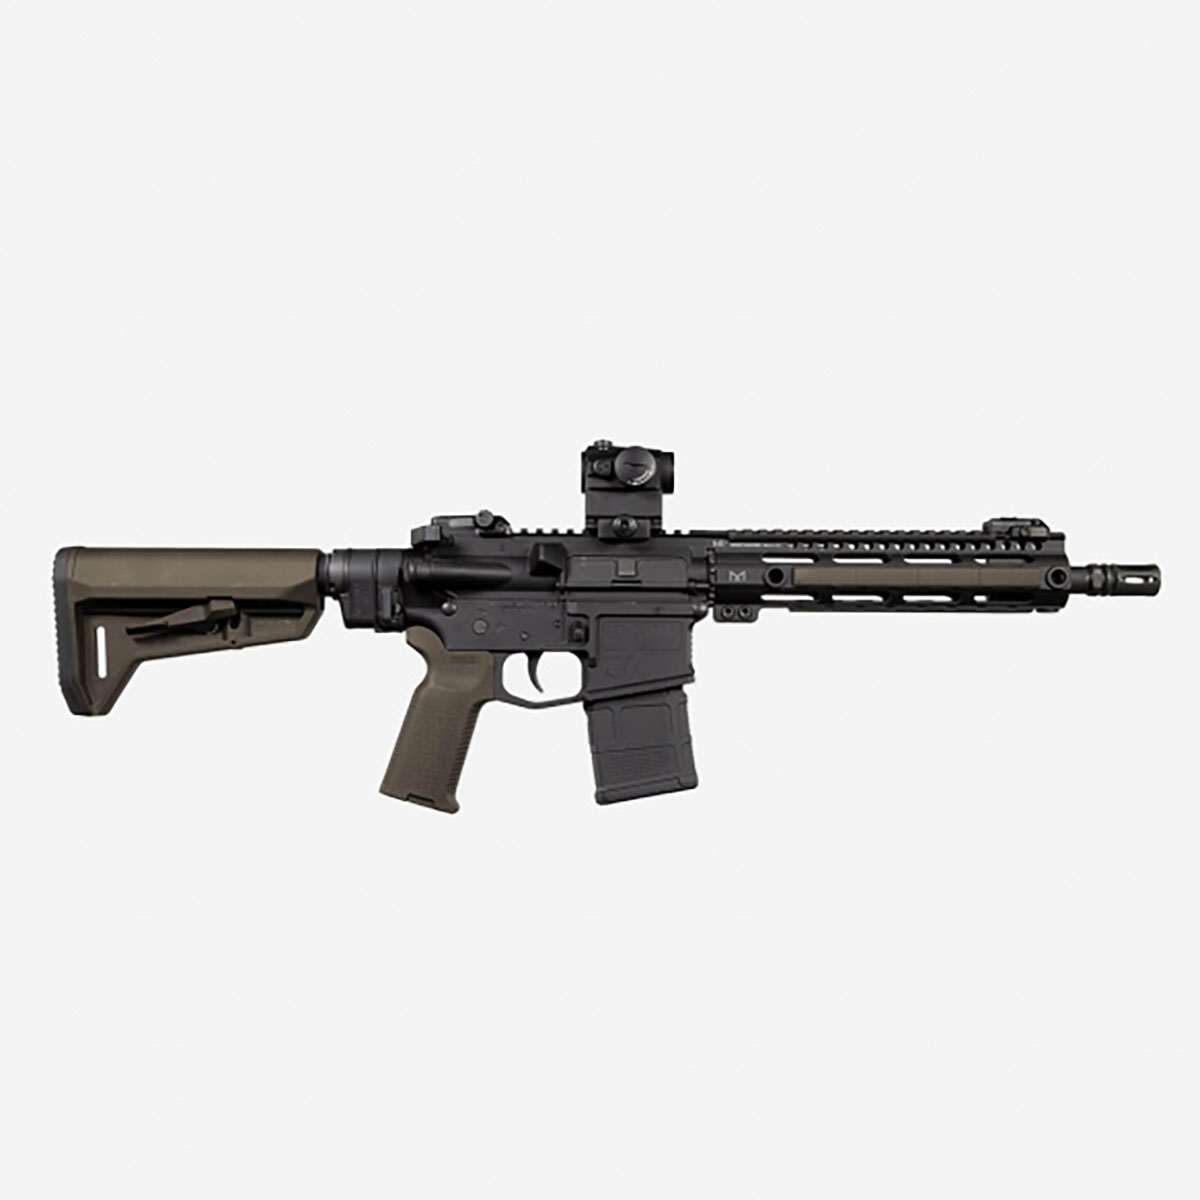 MAGPUL AR-15 MOE SL-K STOCK COLLAPSIBLE MIL-SPEC